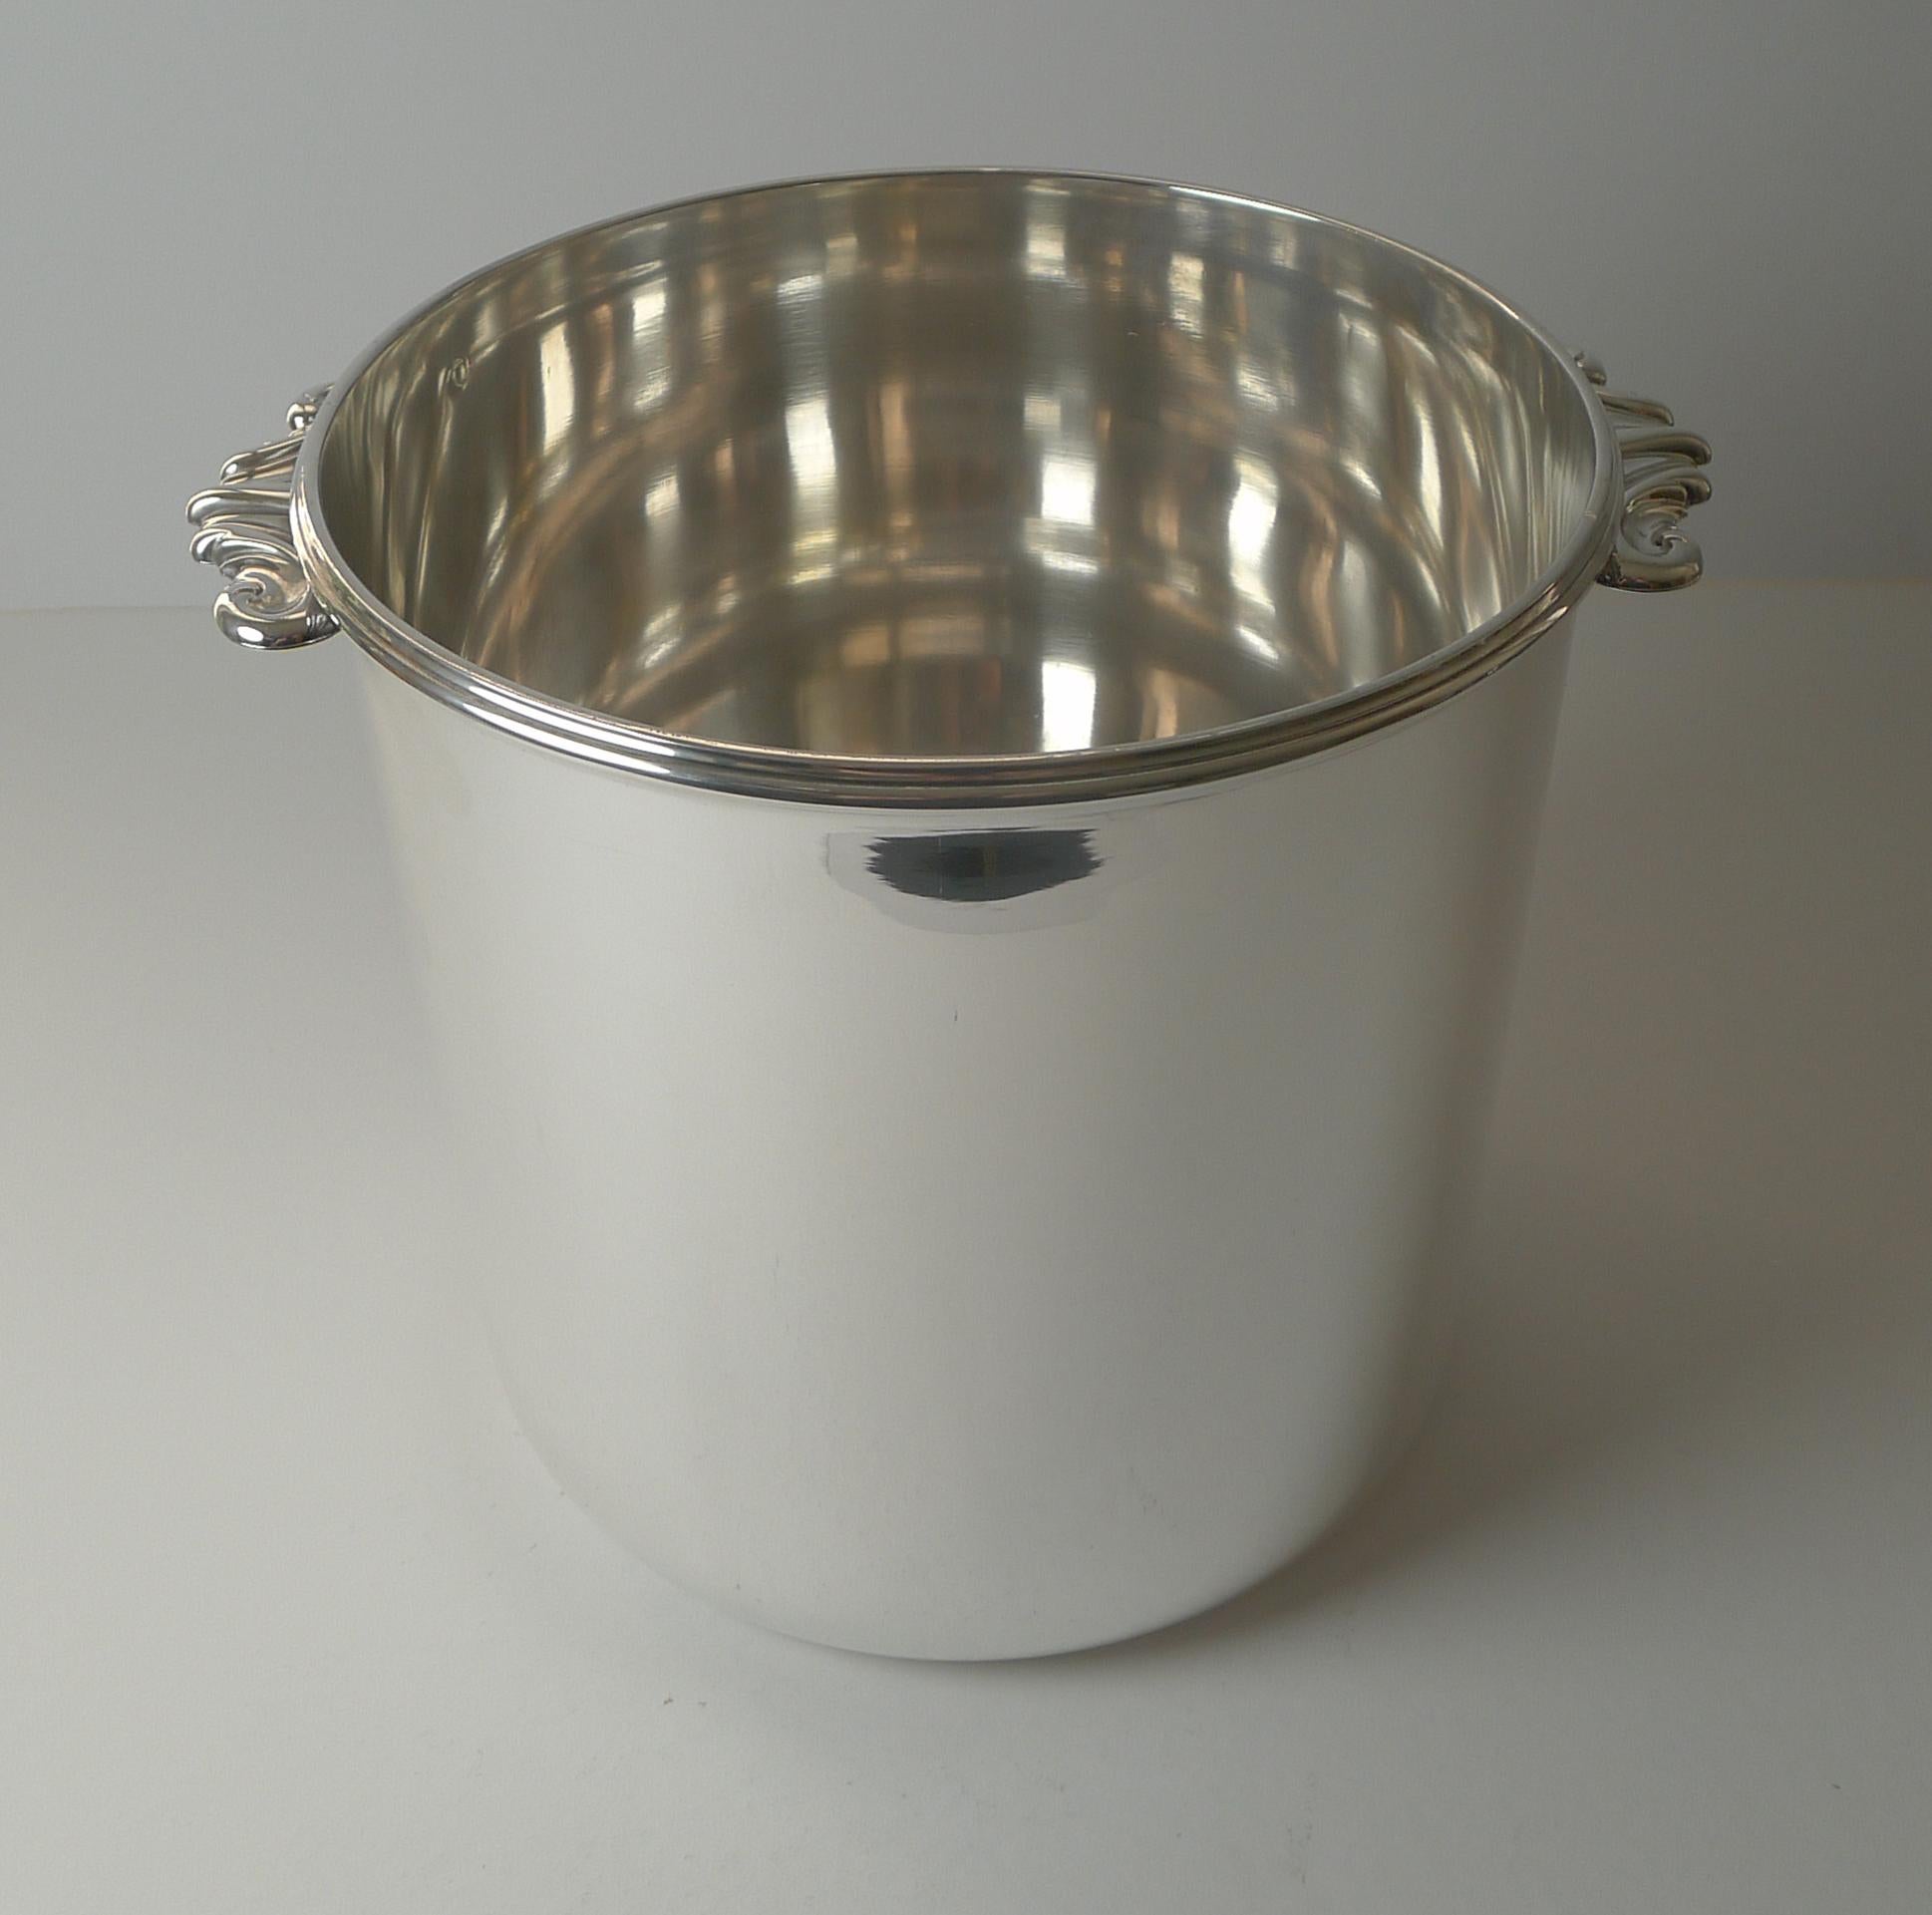 A very smart antique French Champagne bucket or wine cooler by the top-notch and highly collectable silversmith, Emile Puiforcat.

Just back from our silversmith's workshop, it has been professionally cleaned and polished, restoring it to it's